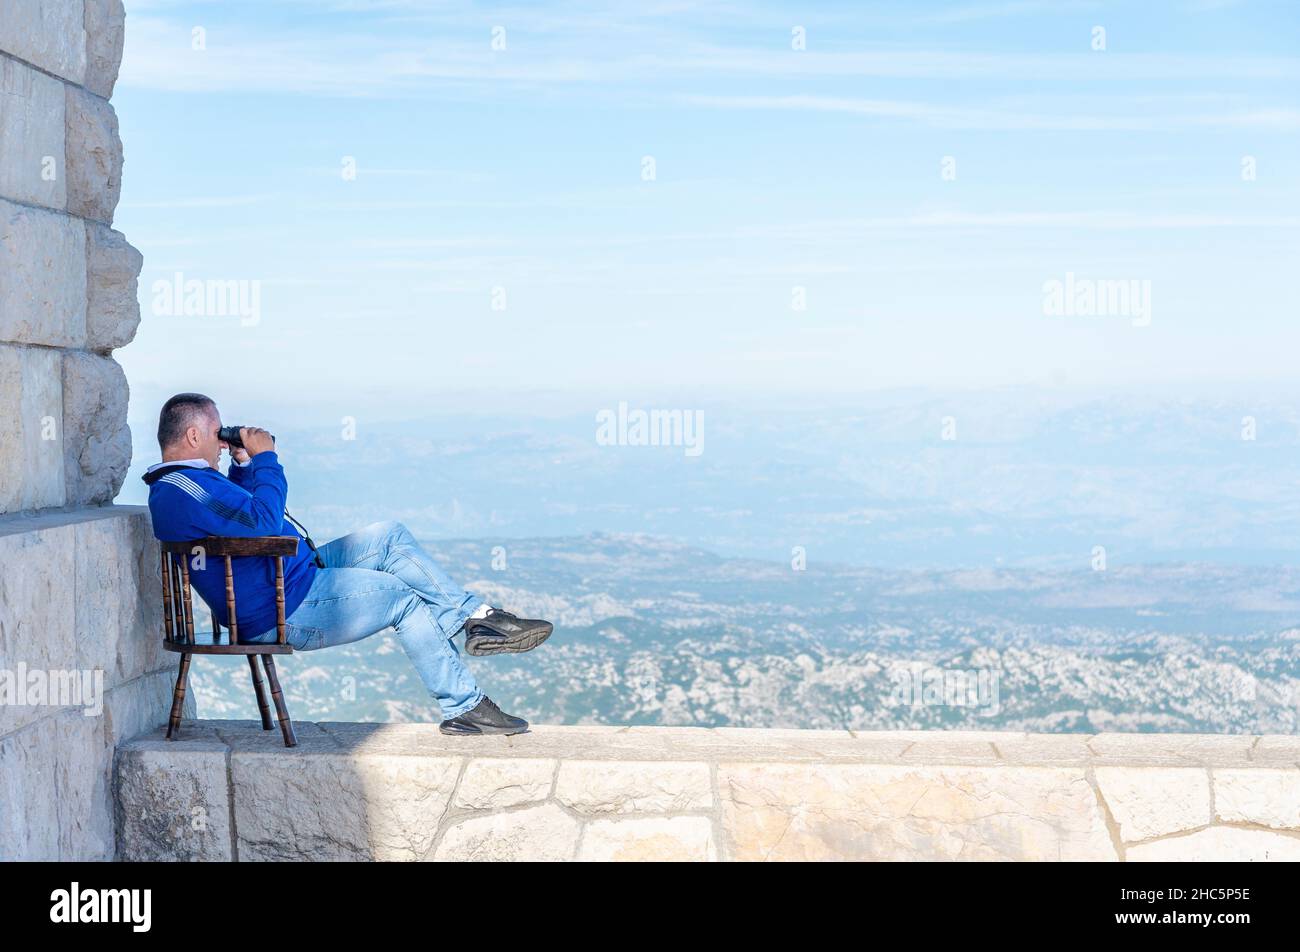 Lovcen,Montenegro-September 14 2019: On the summit of Mount Lovcen,on a warm sunny afternoon,a person sits on a wall in his chair,looking down at the Stock Photo